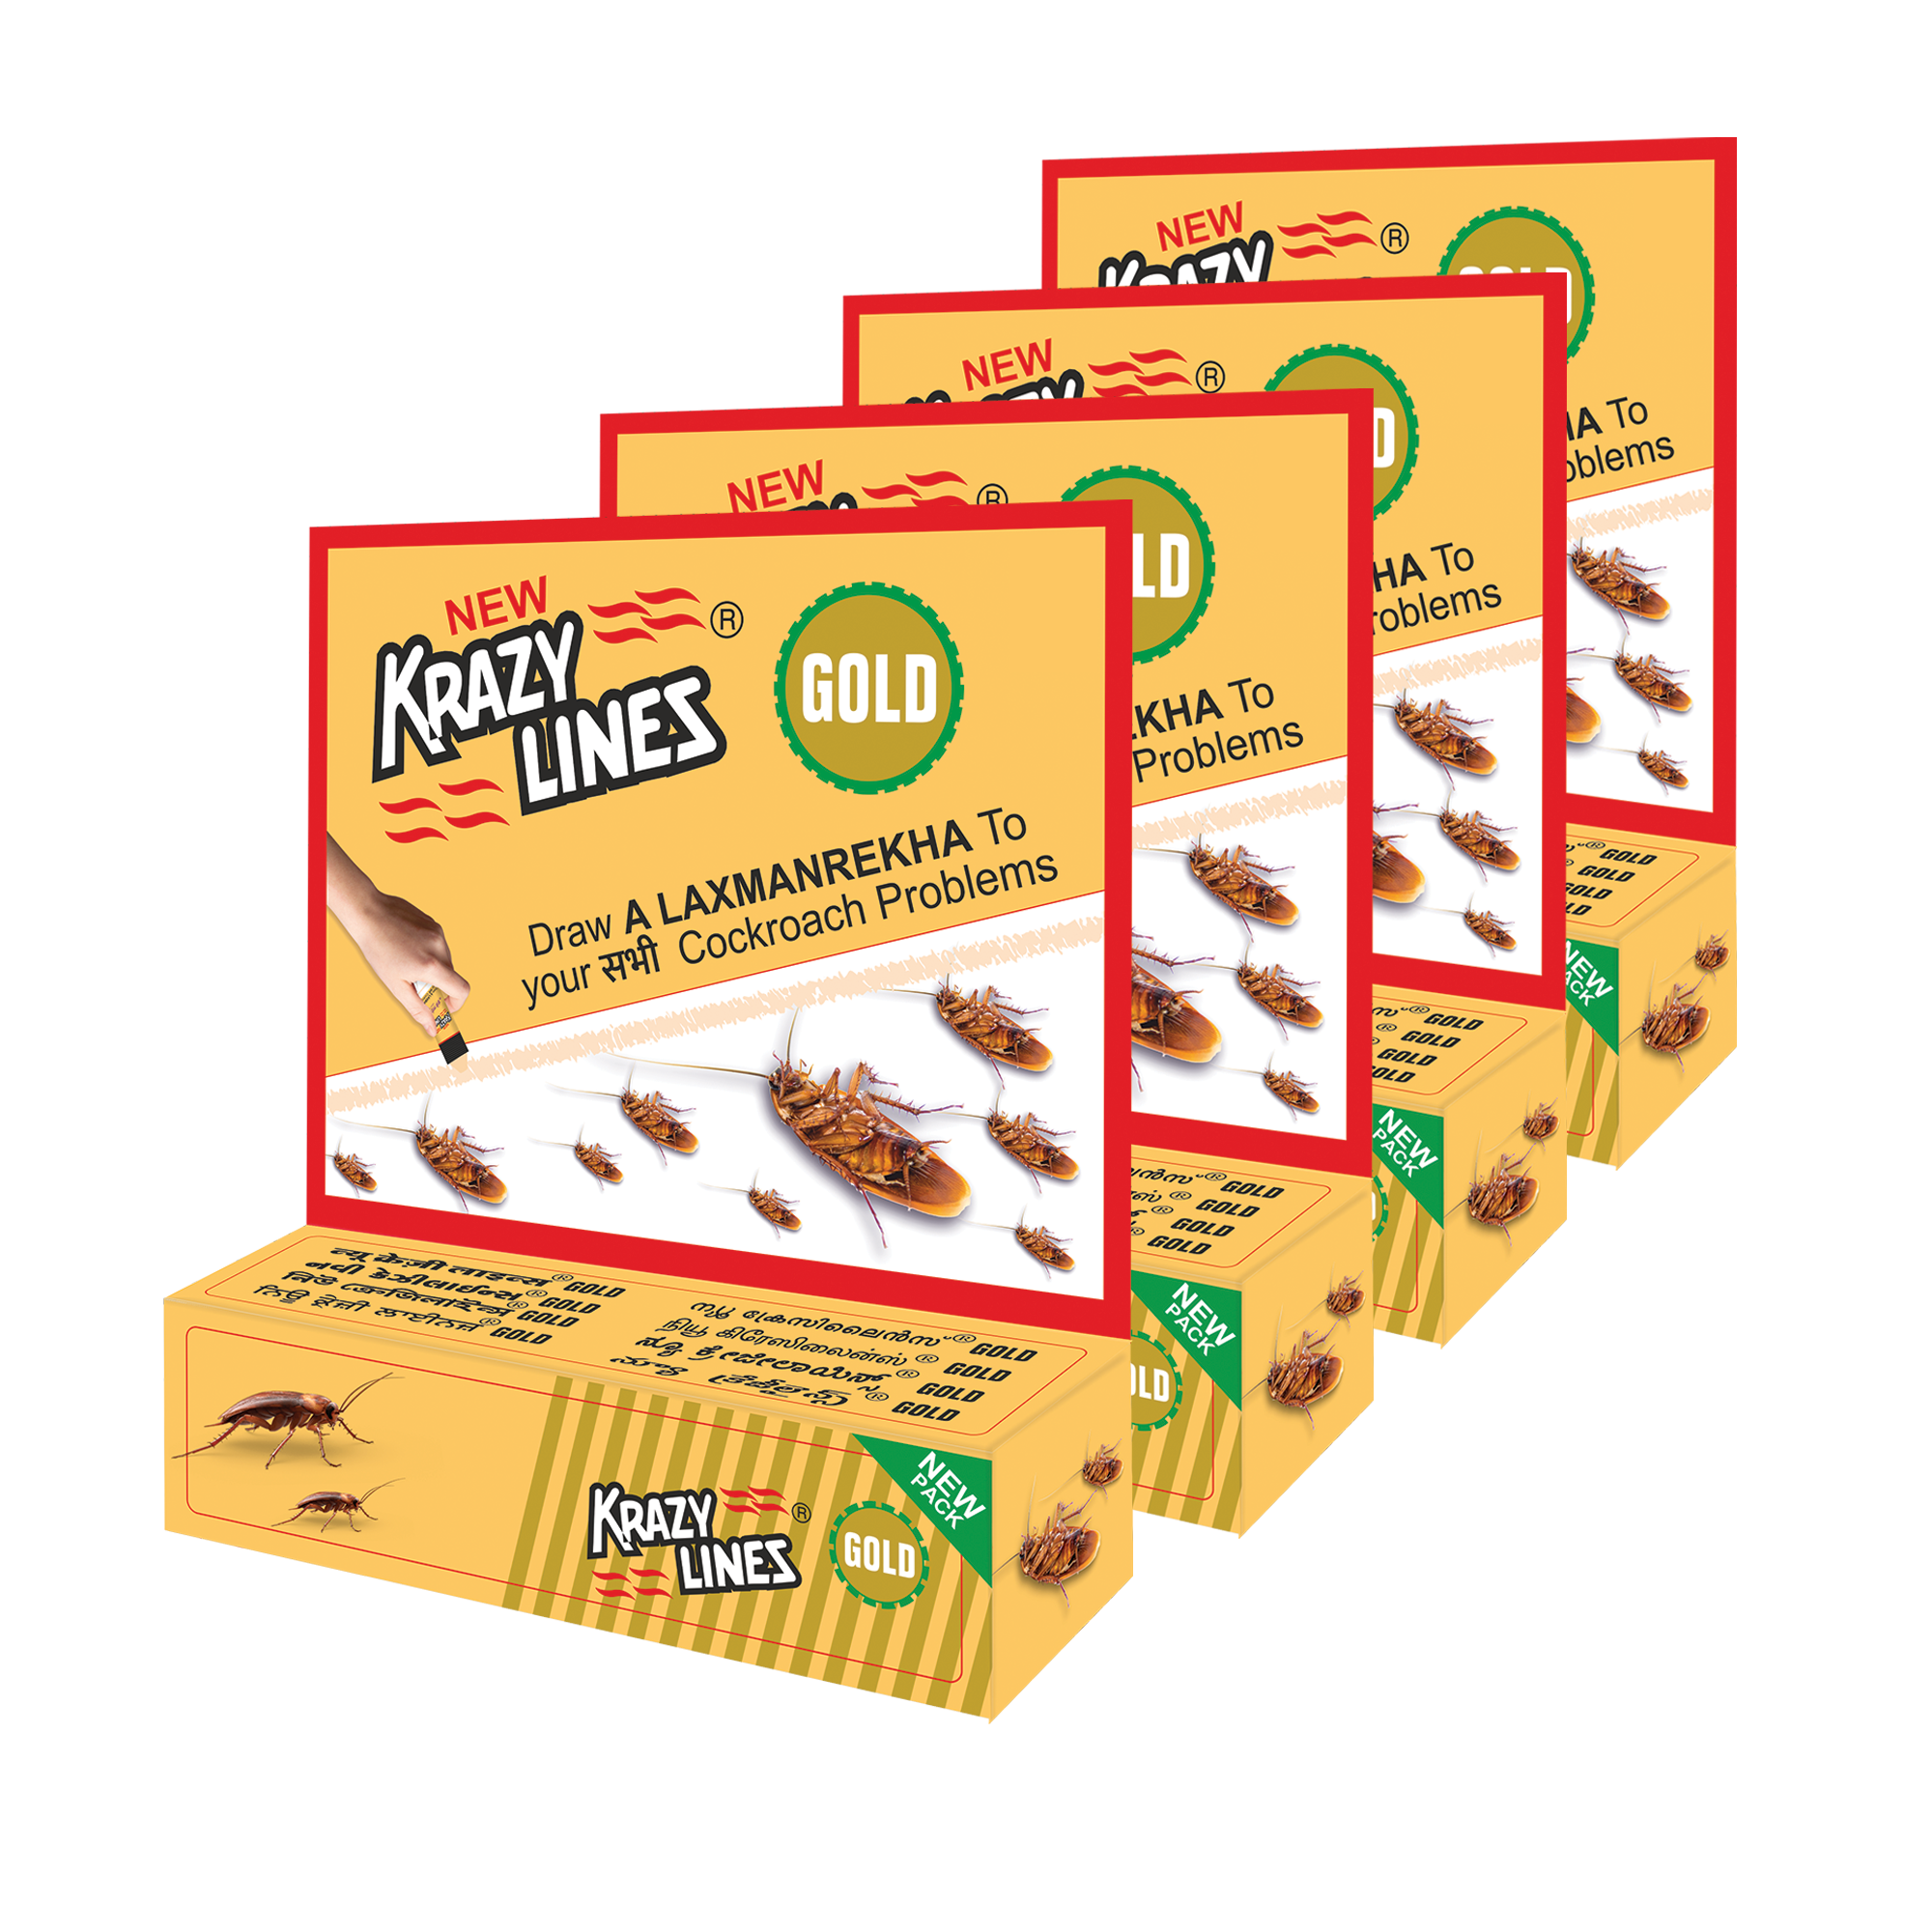 Krazylines Gold (Pack of 4)